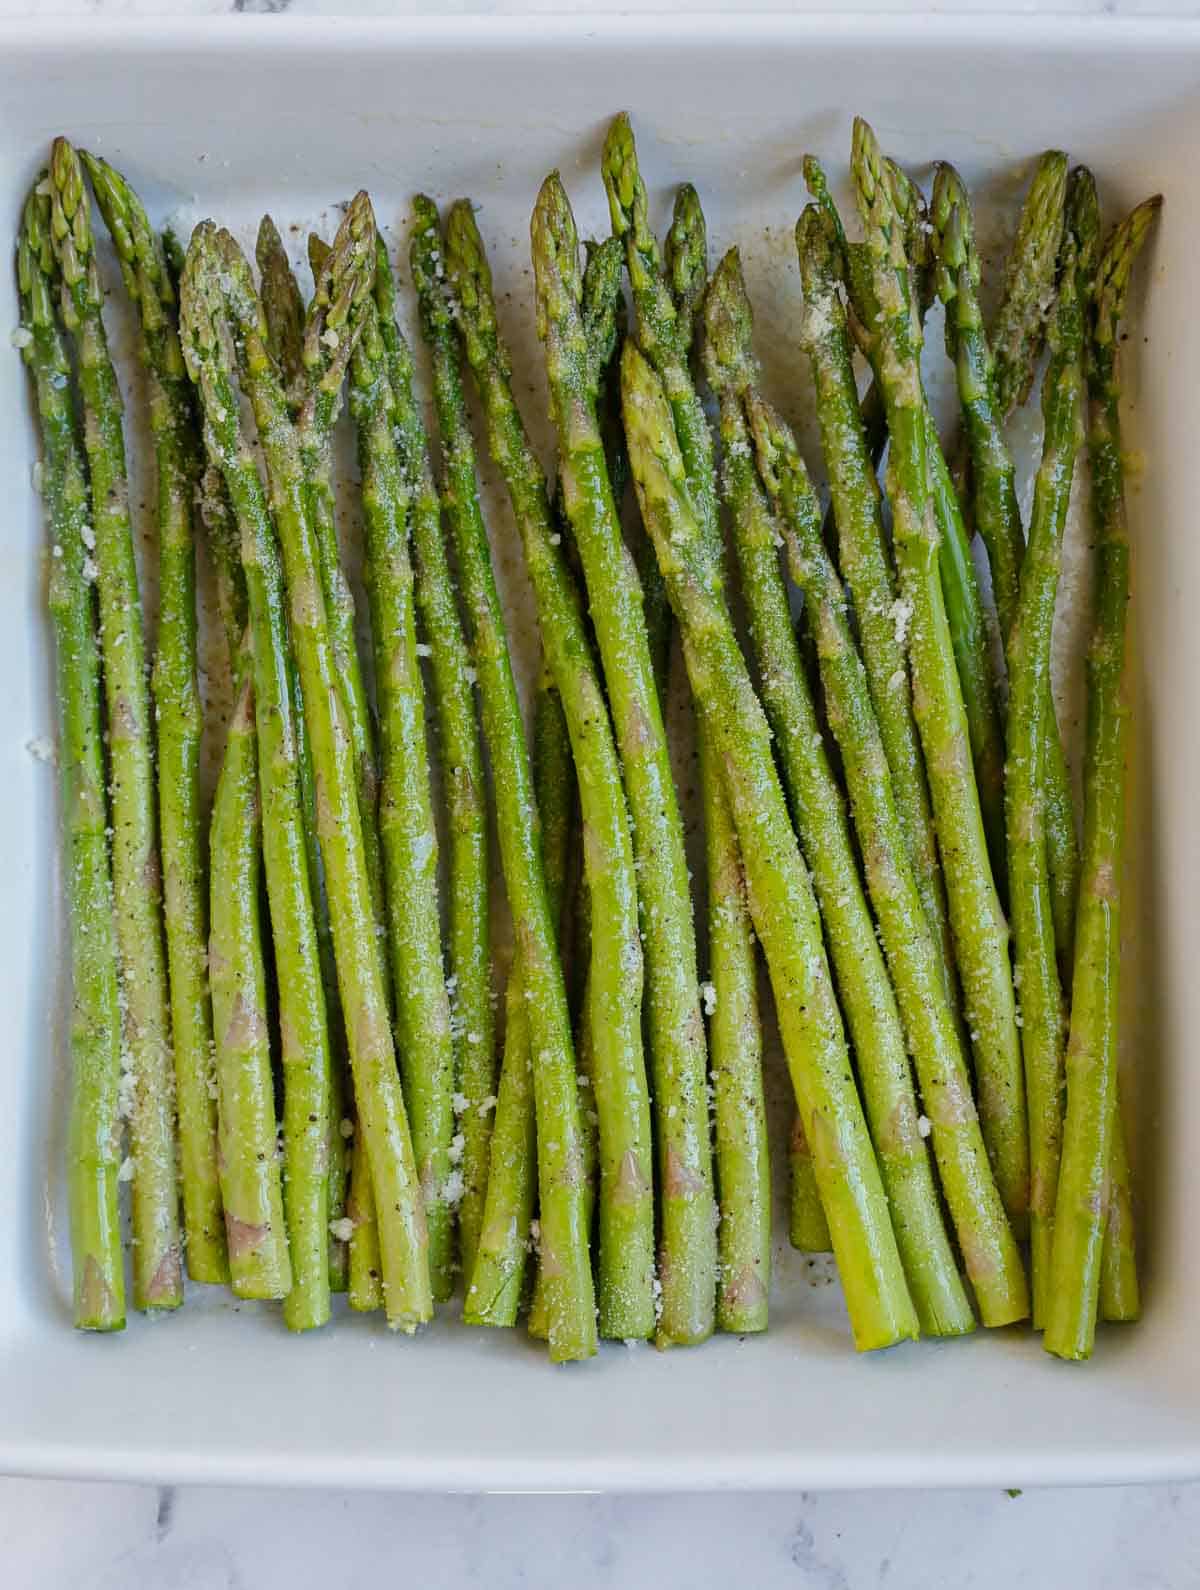 A plate with a pile of asparagus.